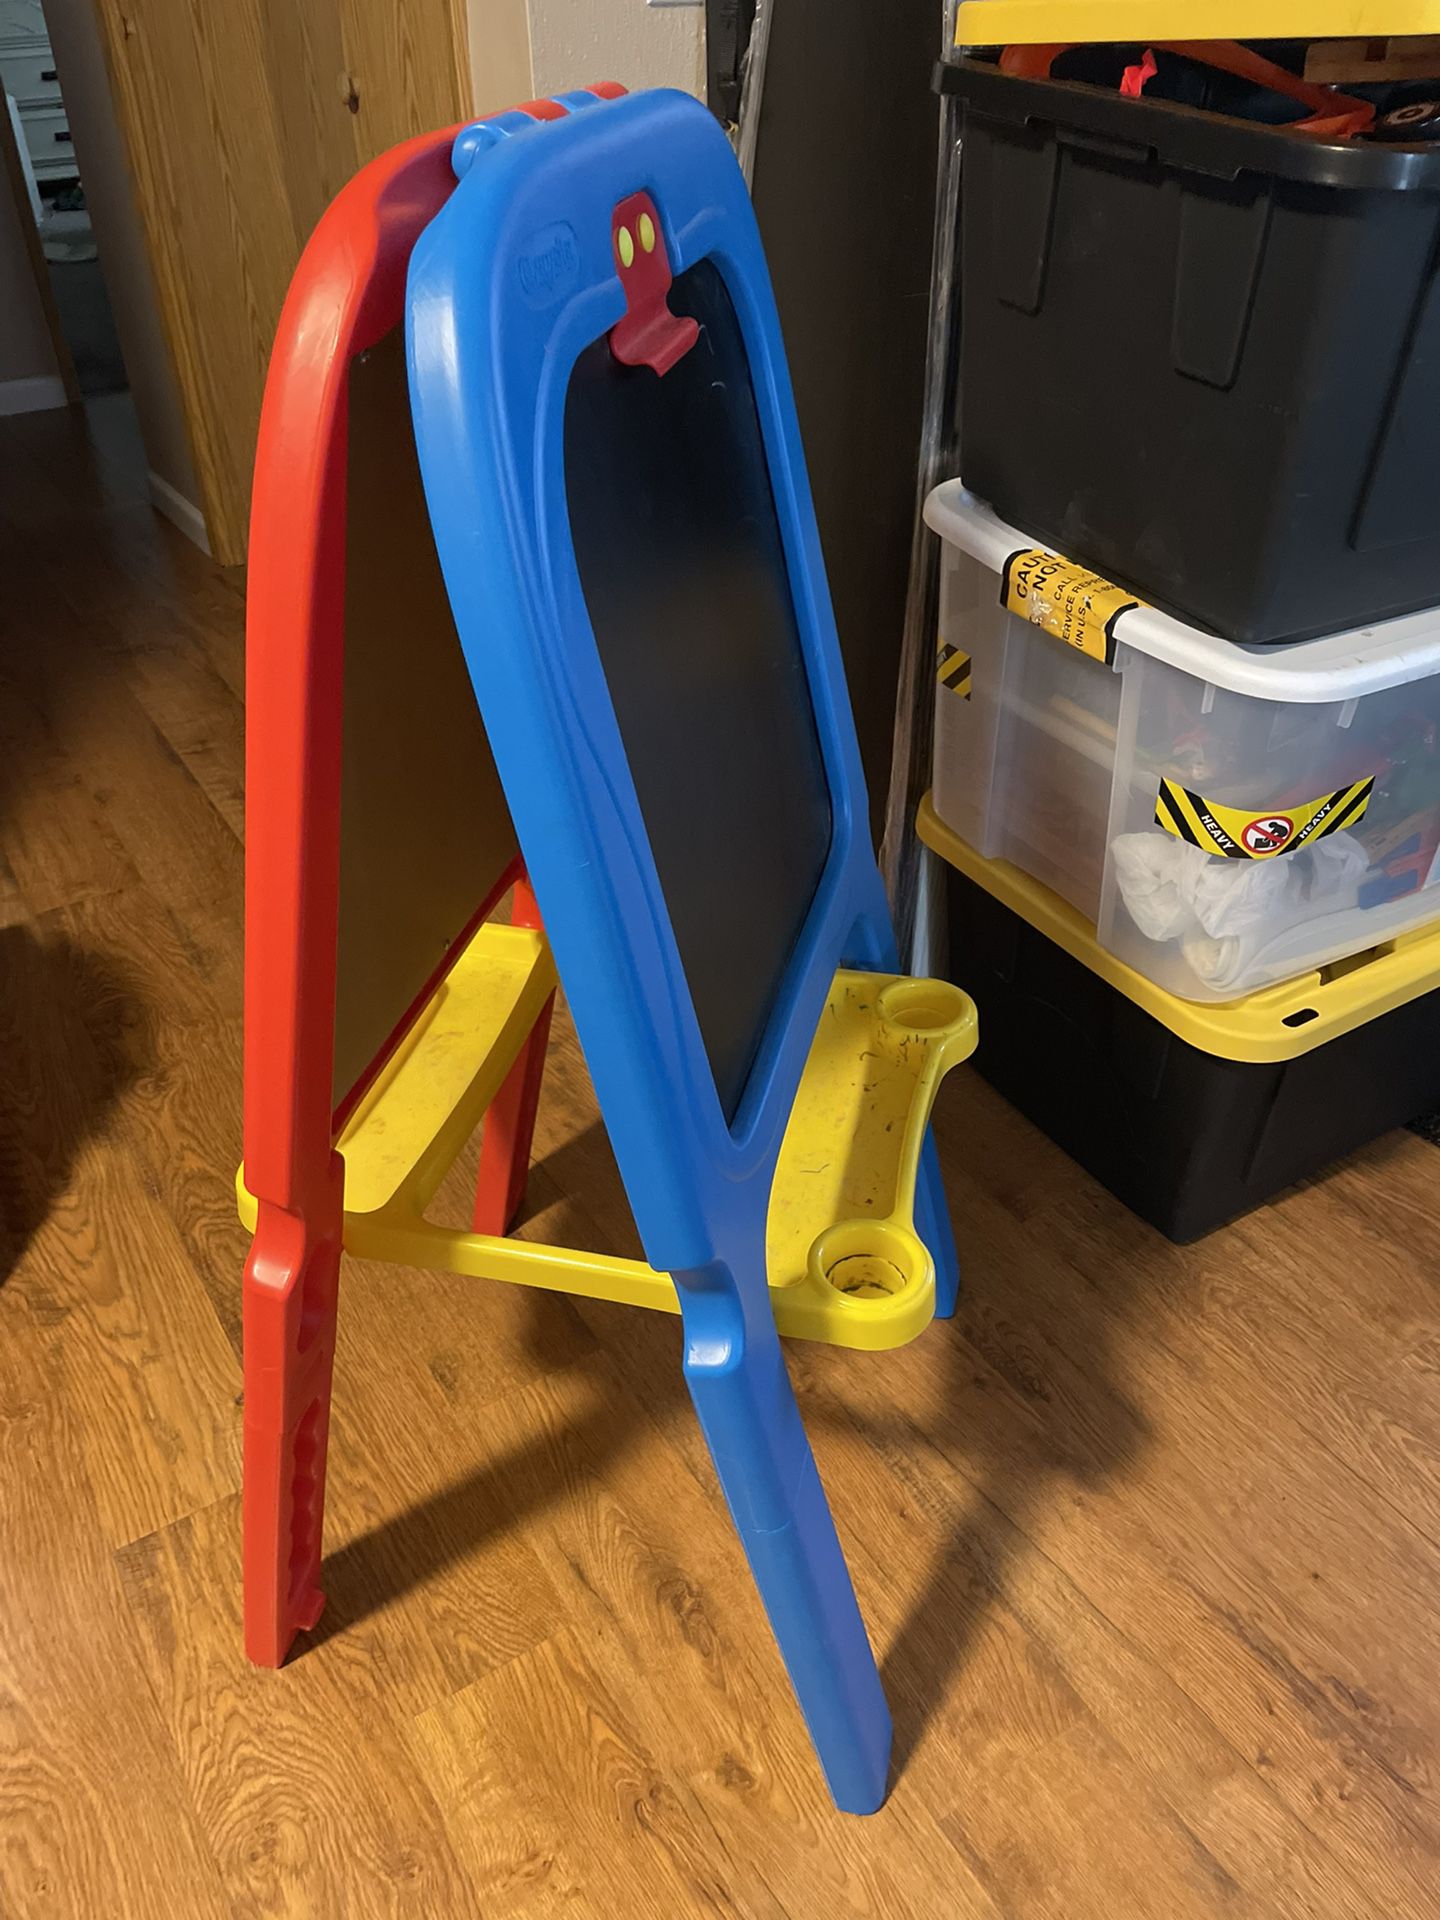 Crayola 3-in-1 Double Easel